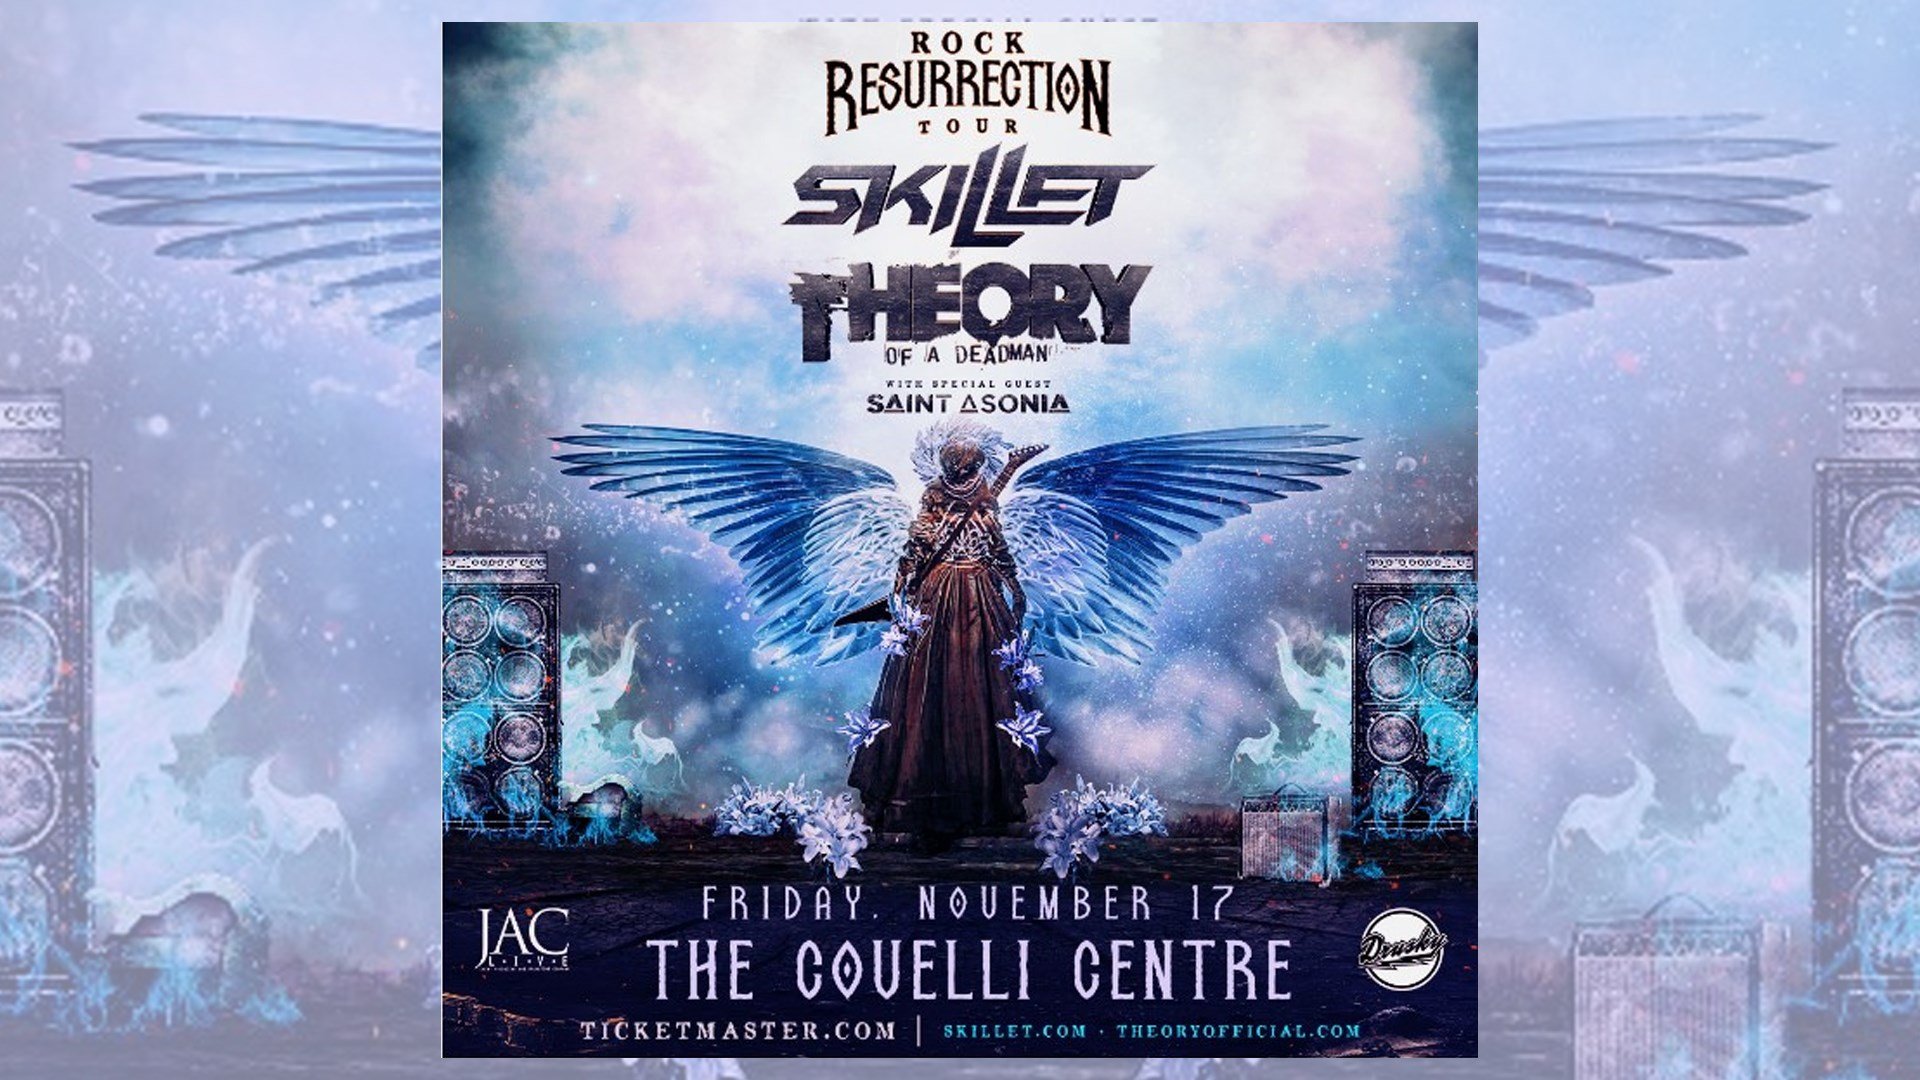 Get Ready to Rock: Skillet and Theory of a Deadman Headline Rock Resurrection Tour at Covelli Centre 16